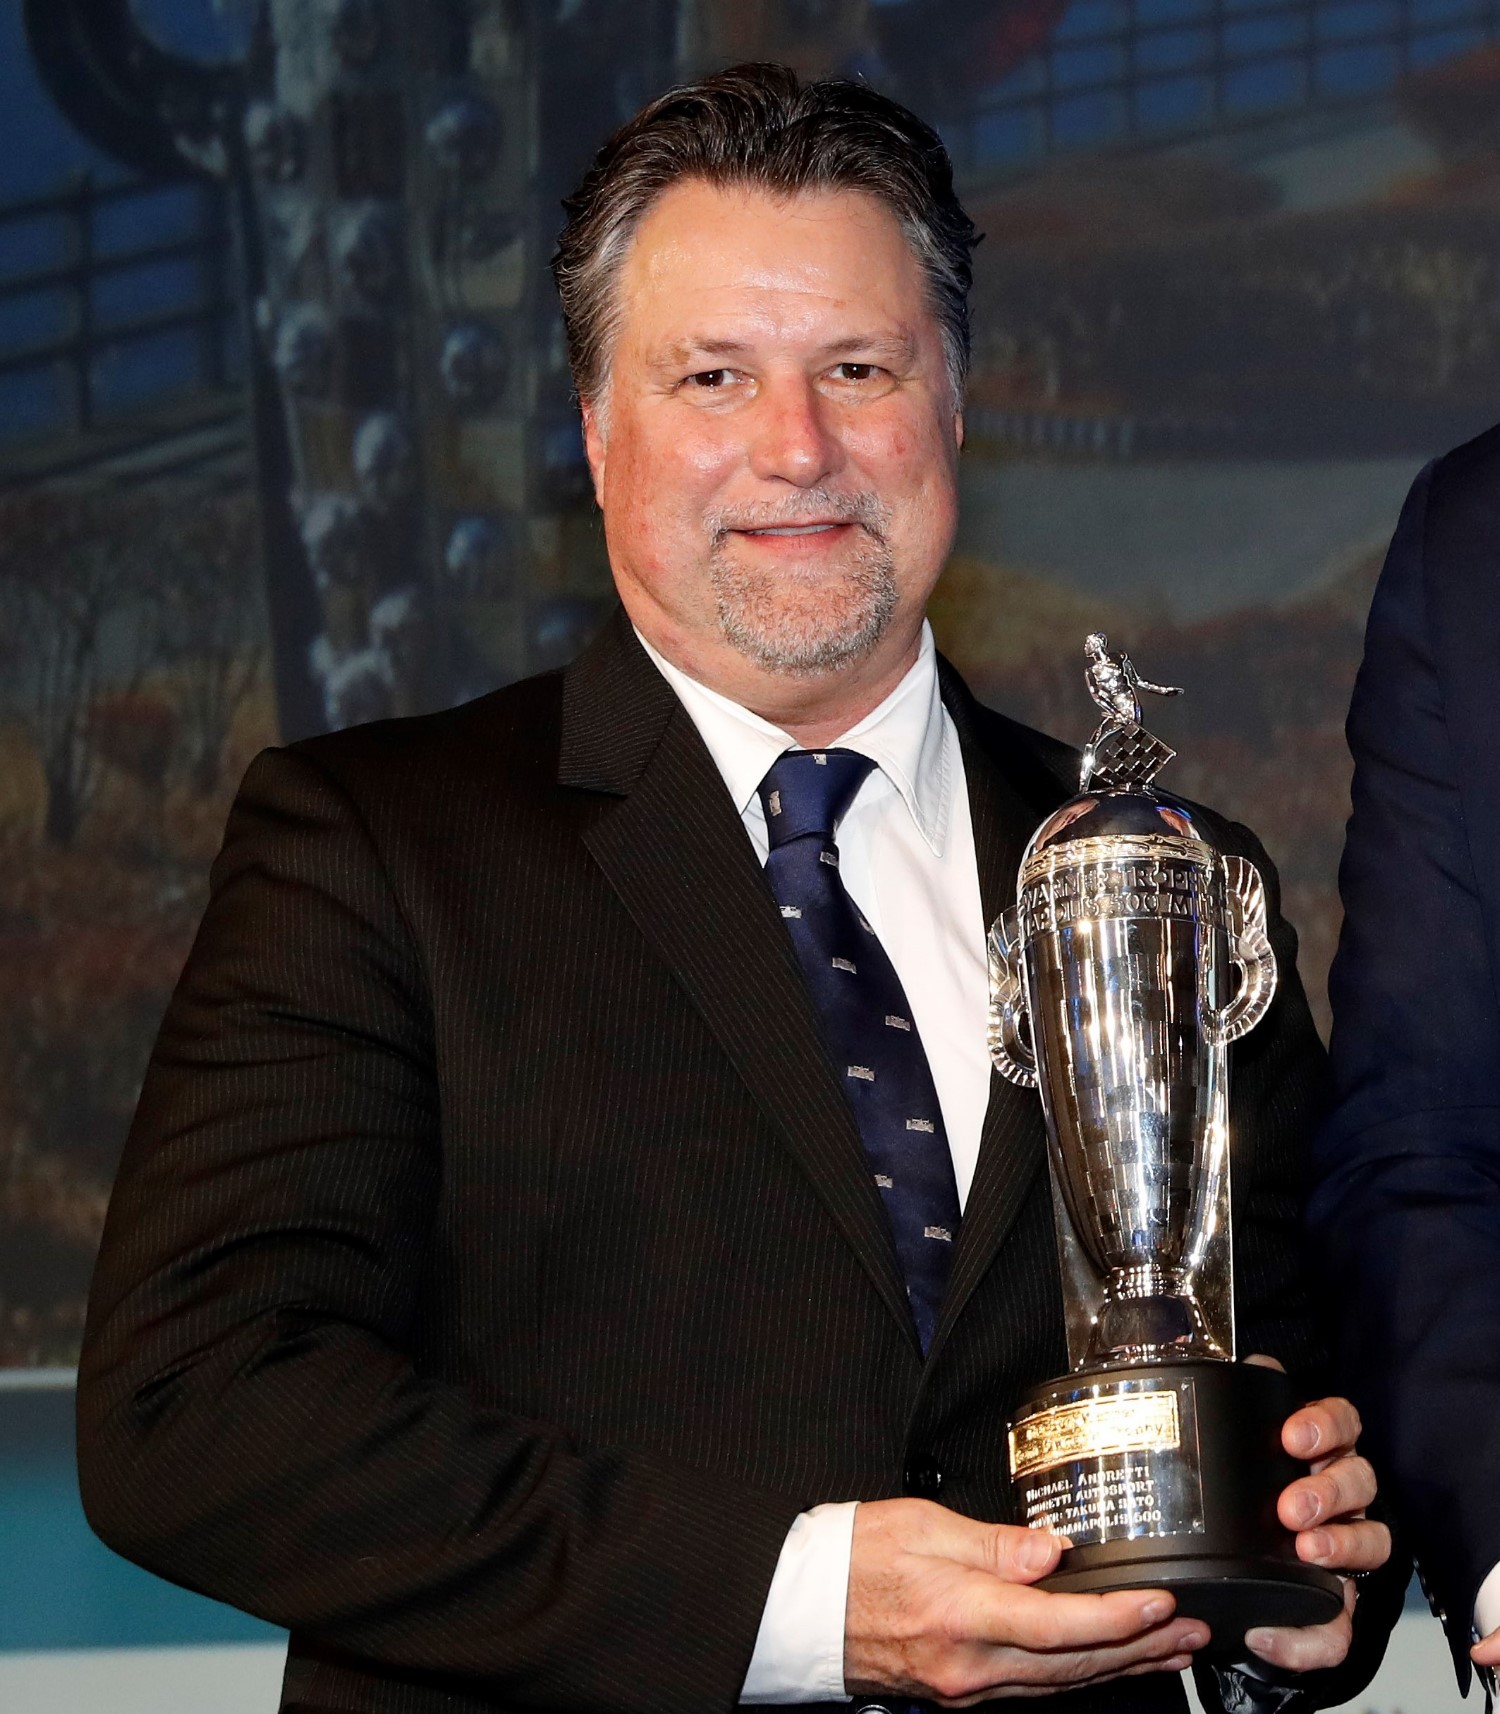 Michael Andretti collects his 5th Baby Borg - so small a Saturday Night track race trophy dwarfs it. IMS should be ashamed of themselves